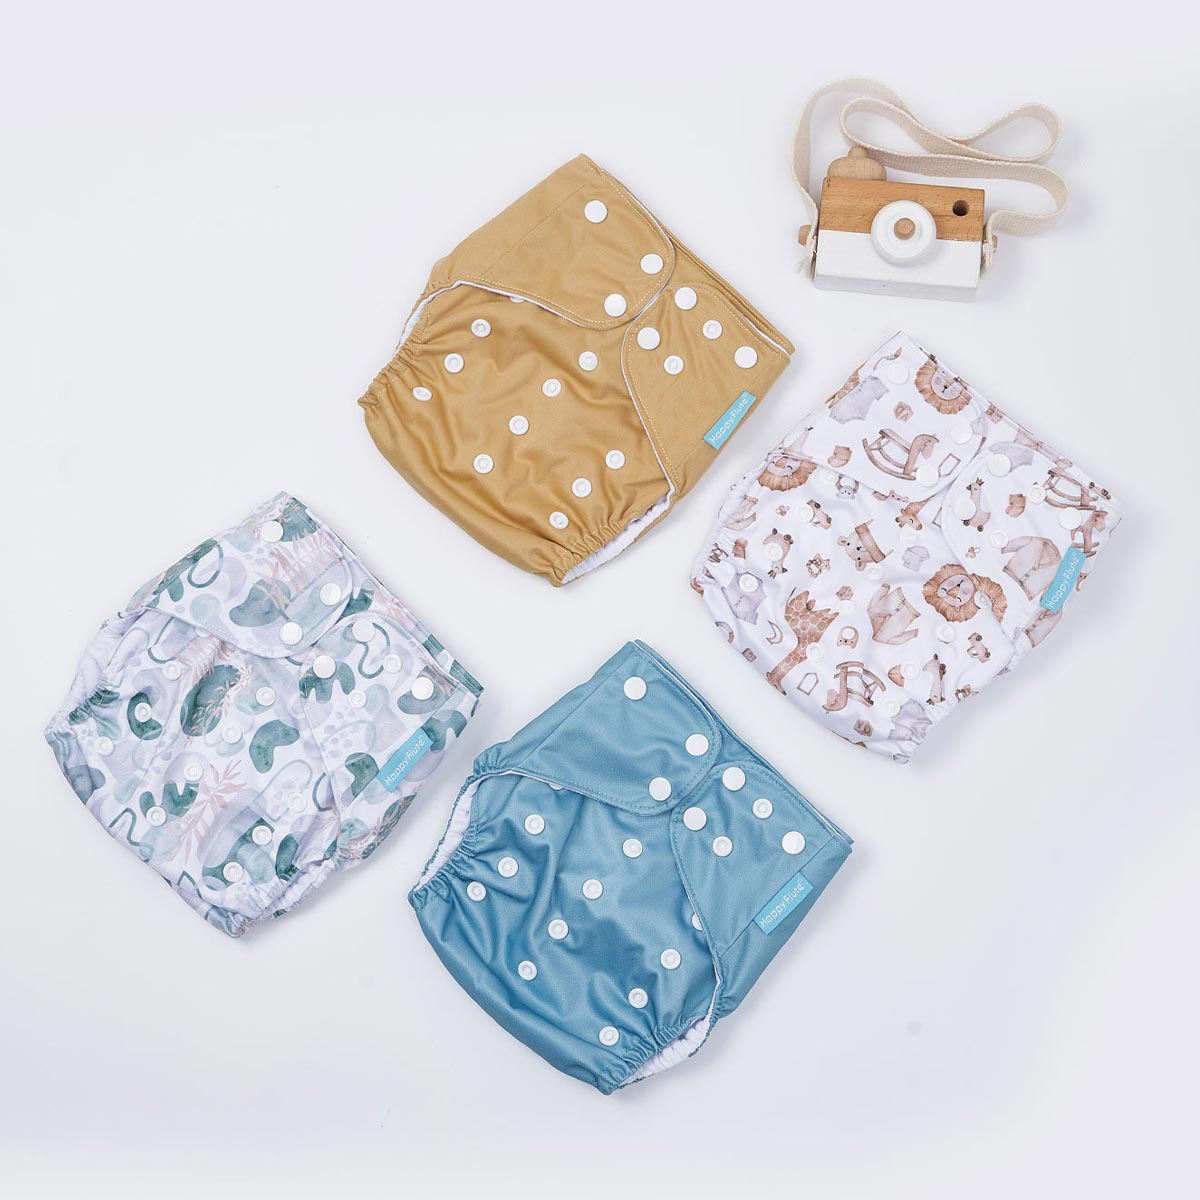 happyflute 4pcs set washable eco friendly cloth diaper covers adjustable nappy reusable cloth diapers cloth nappies for 3 15kg baby details 0